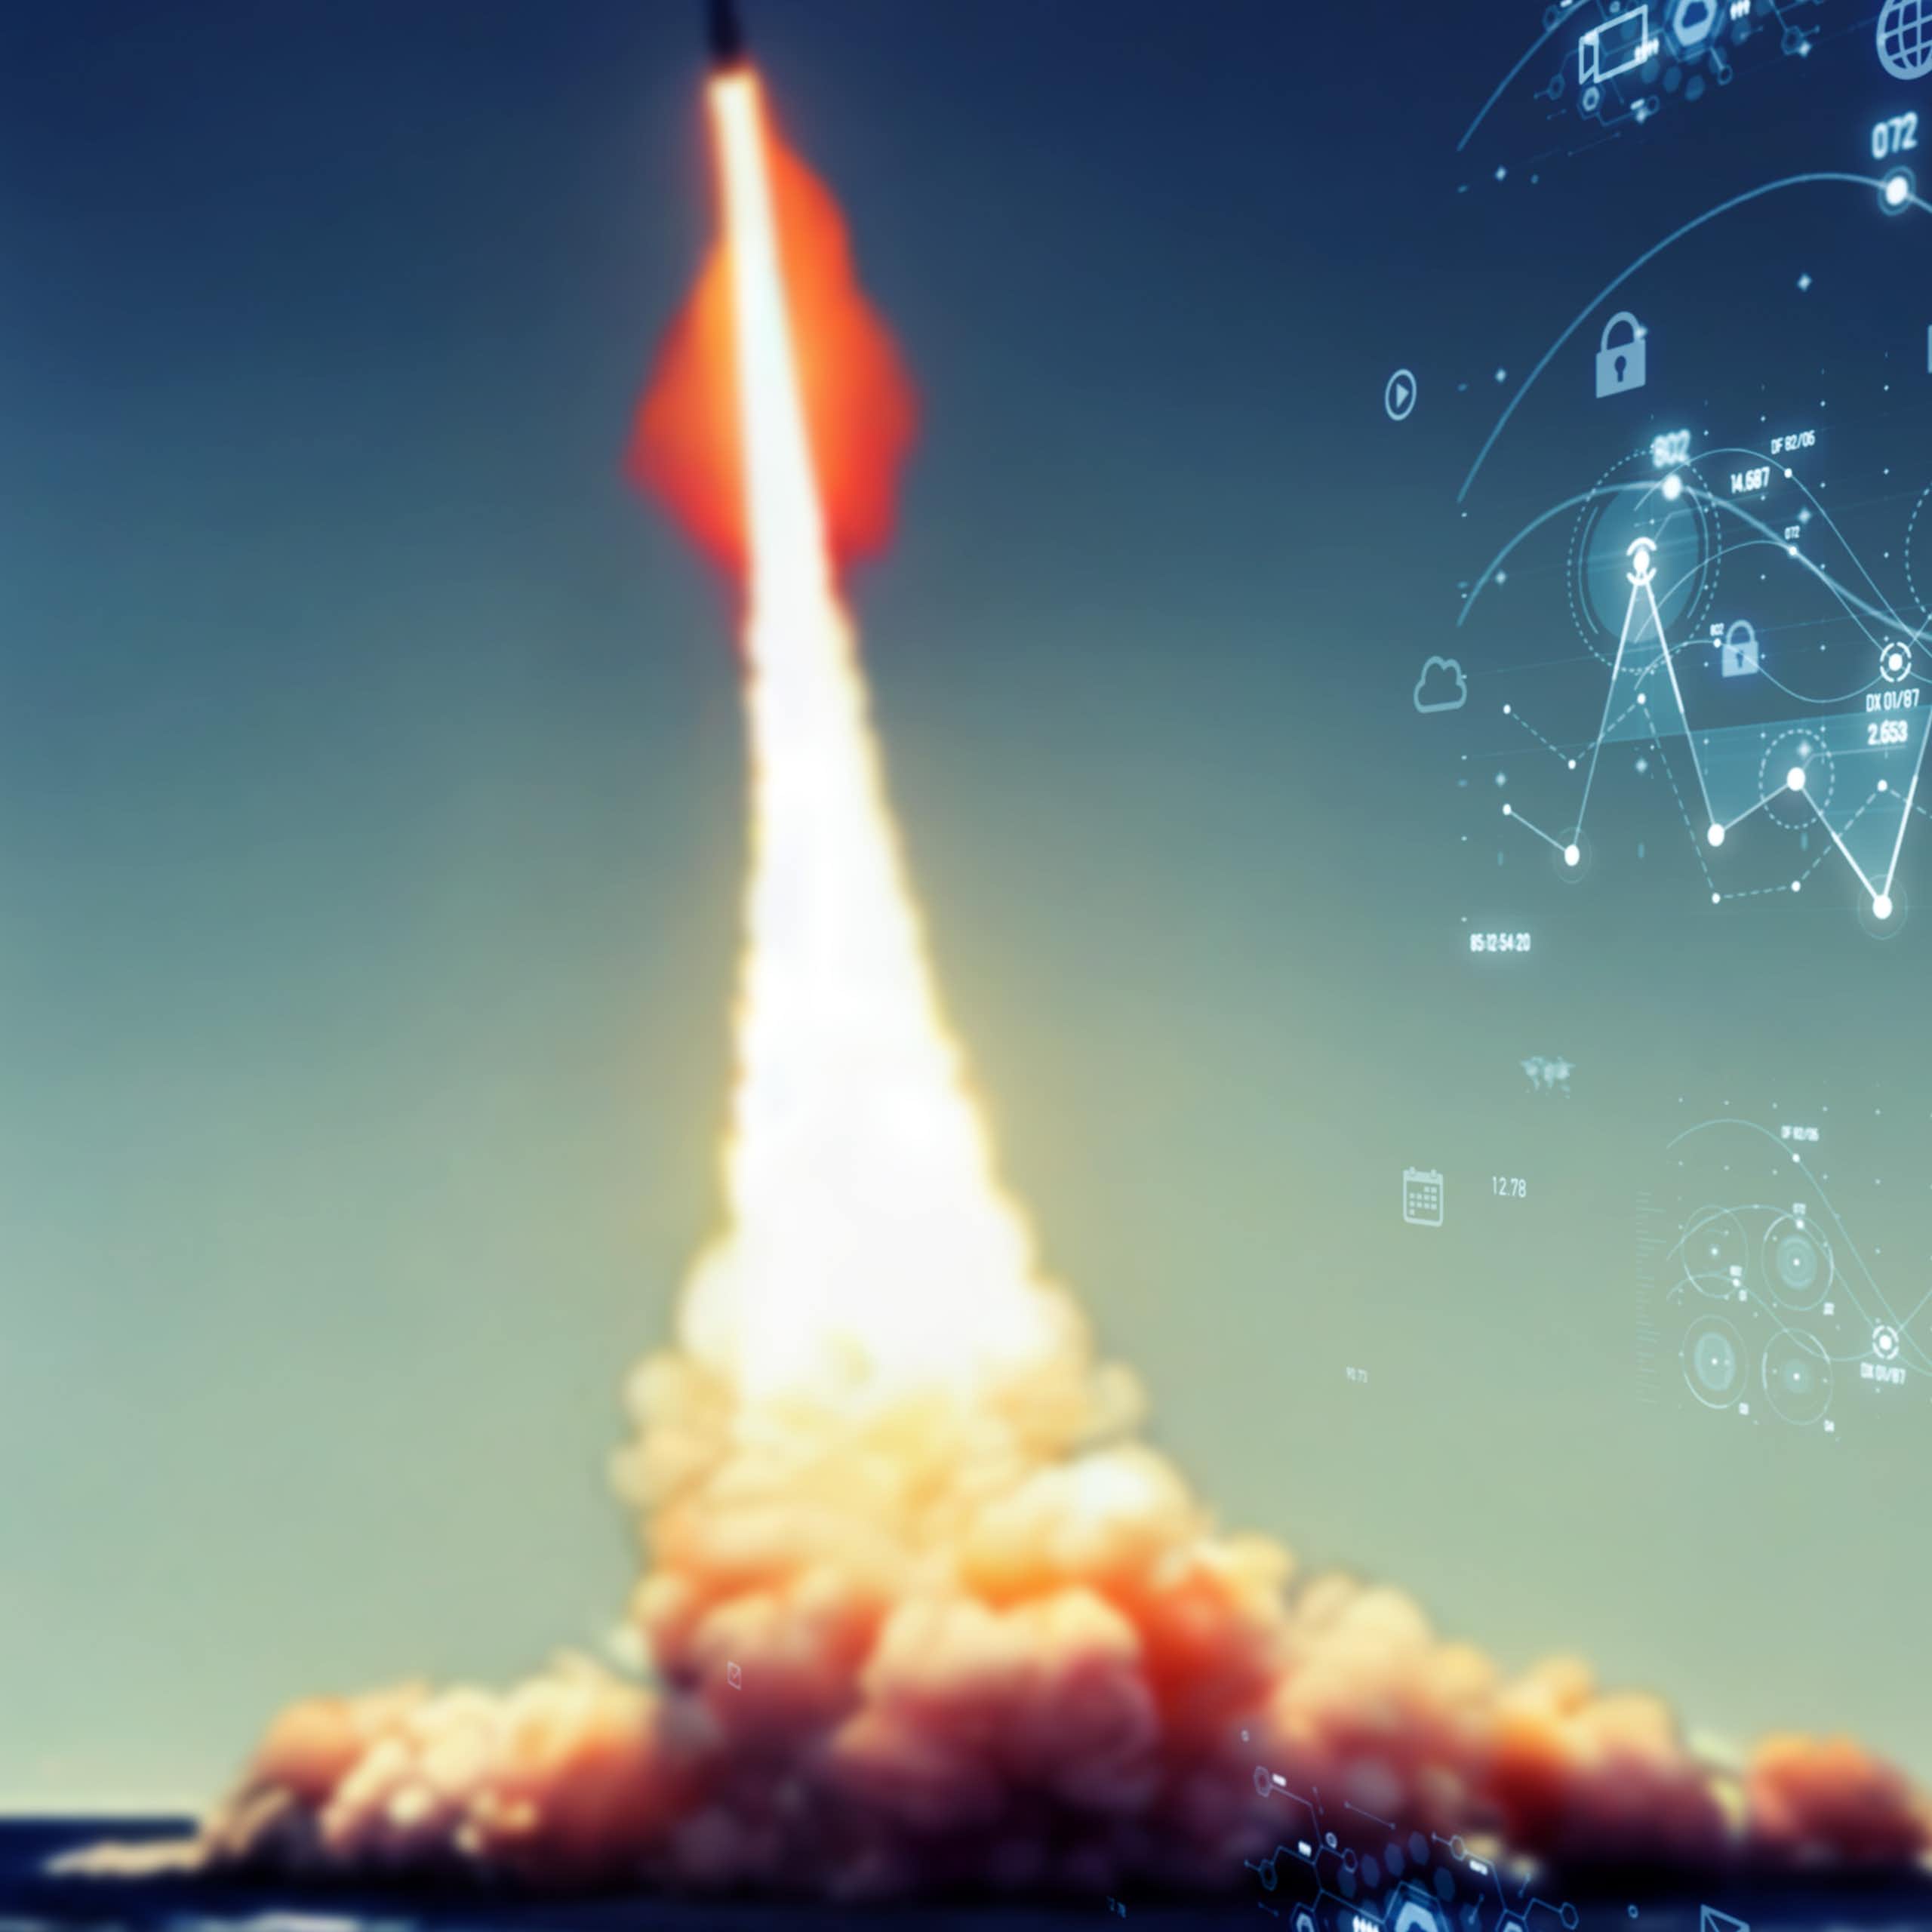 A graphic depiction of a missile being launched into space